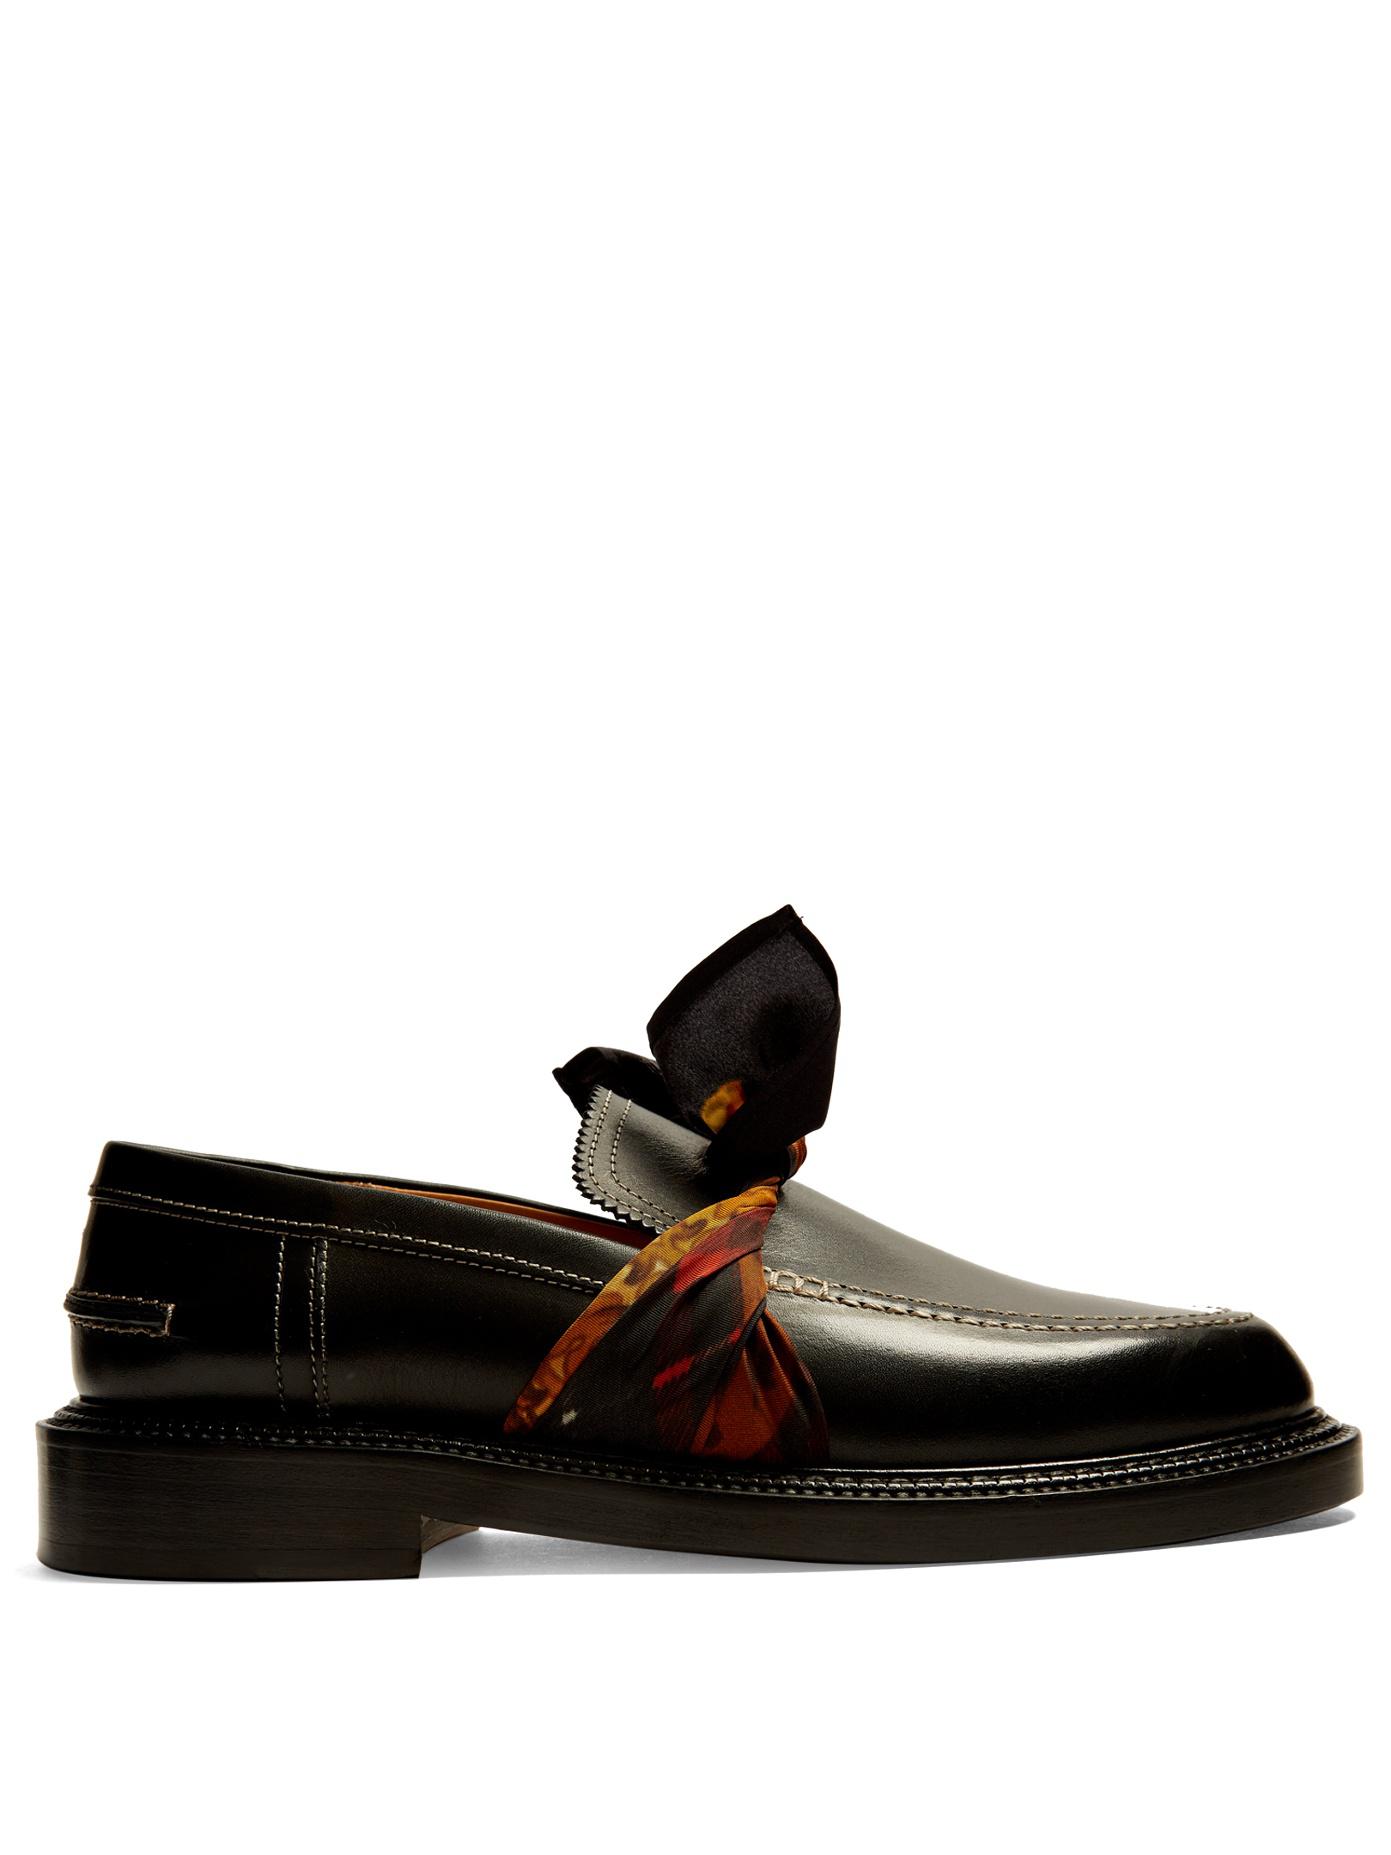 Maison Margiela Silk-scarf Tie-front Leather Loafer in Black | Lyst